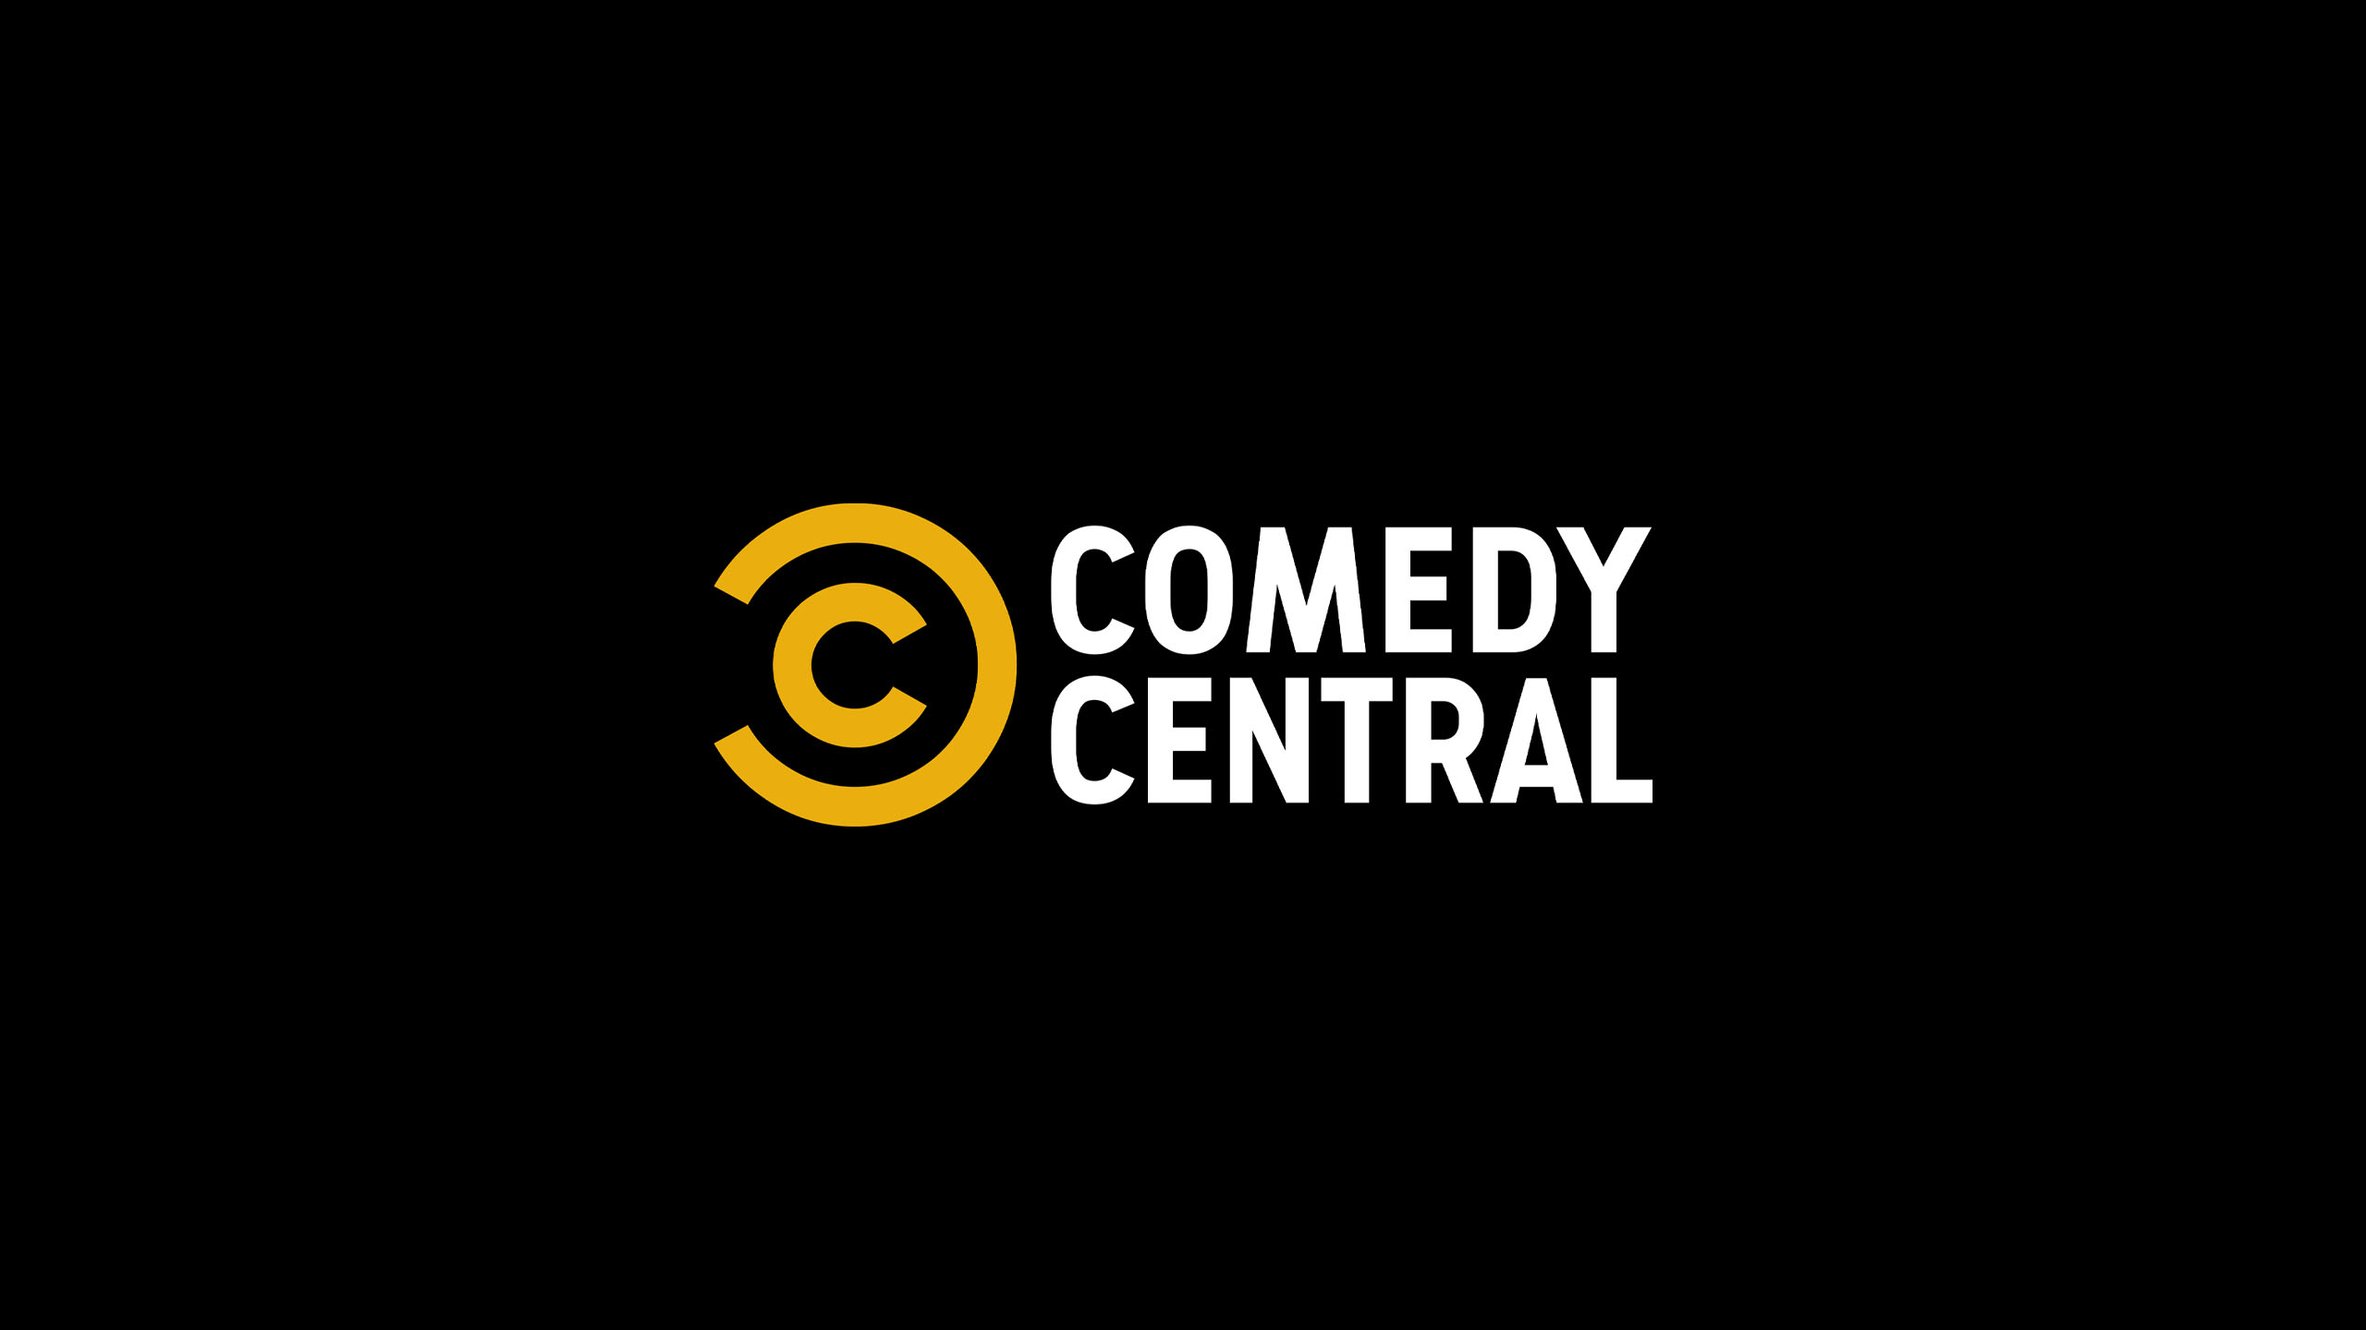 Casting for the Comedy Central series Robbie!